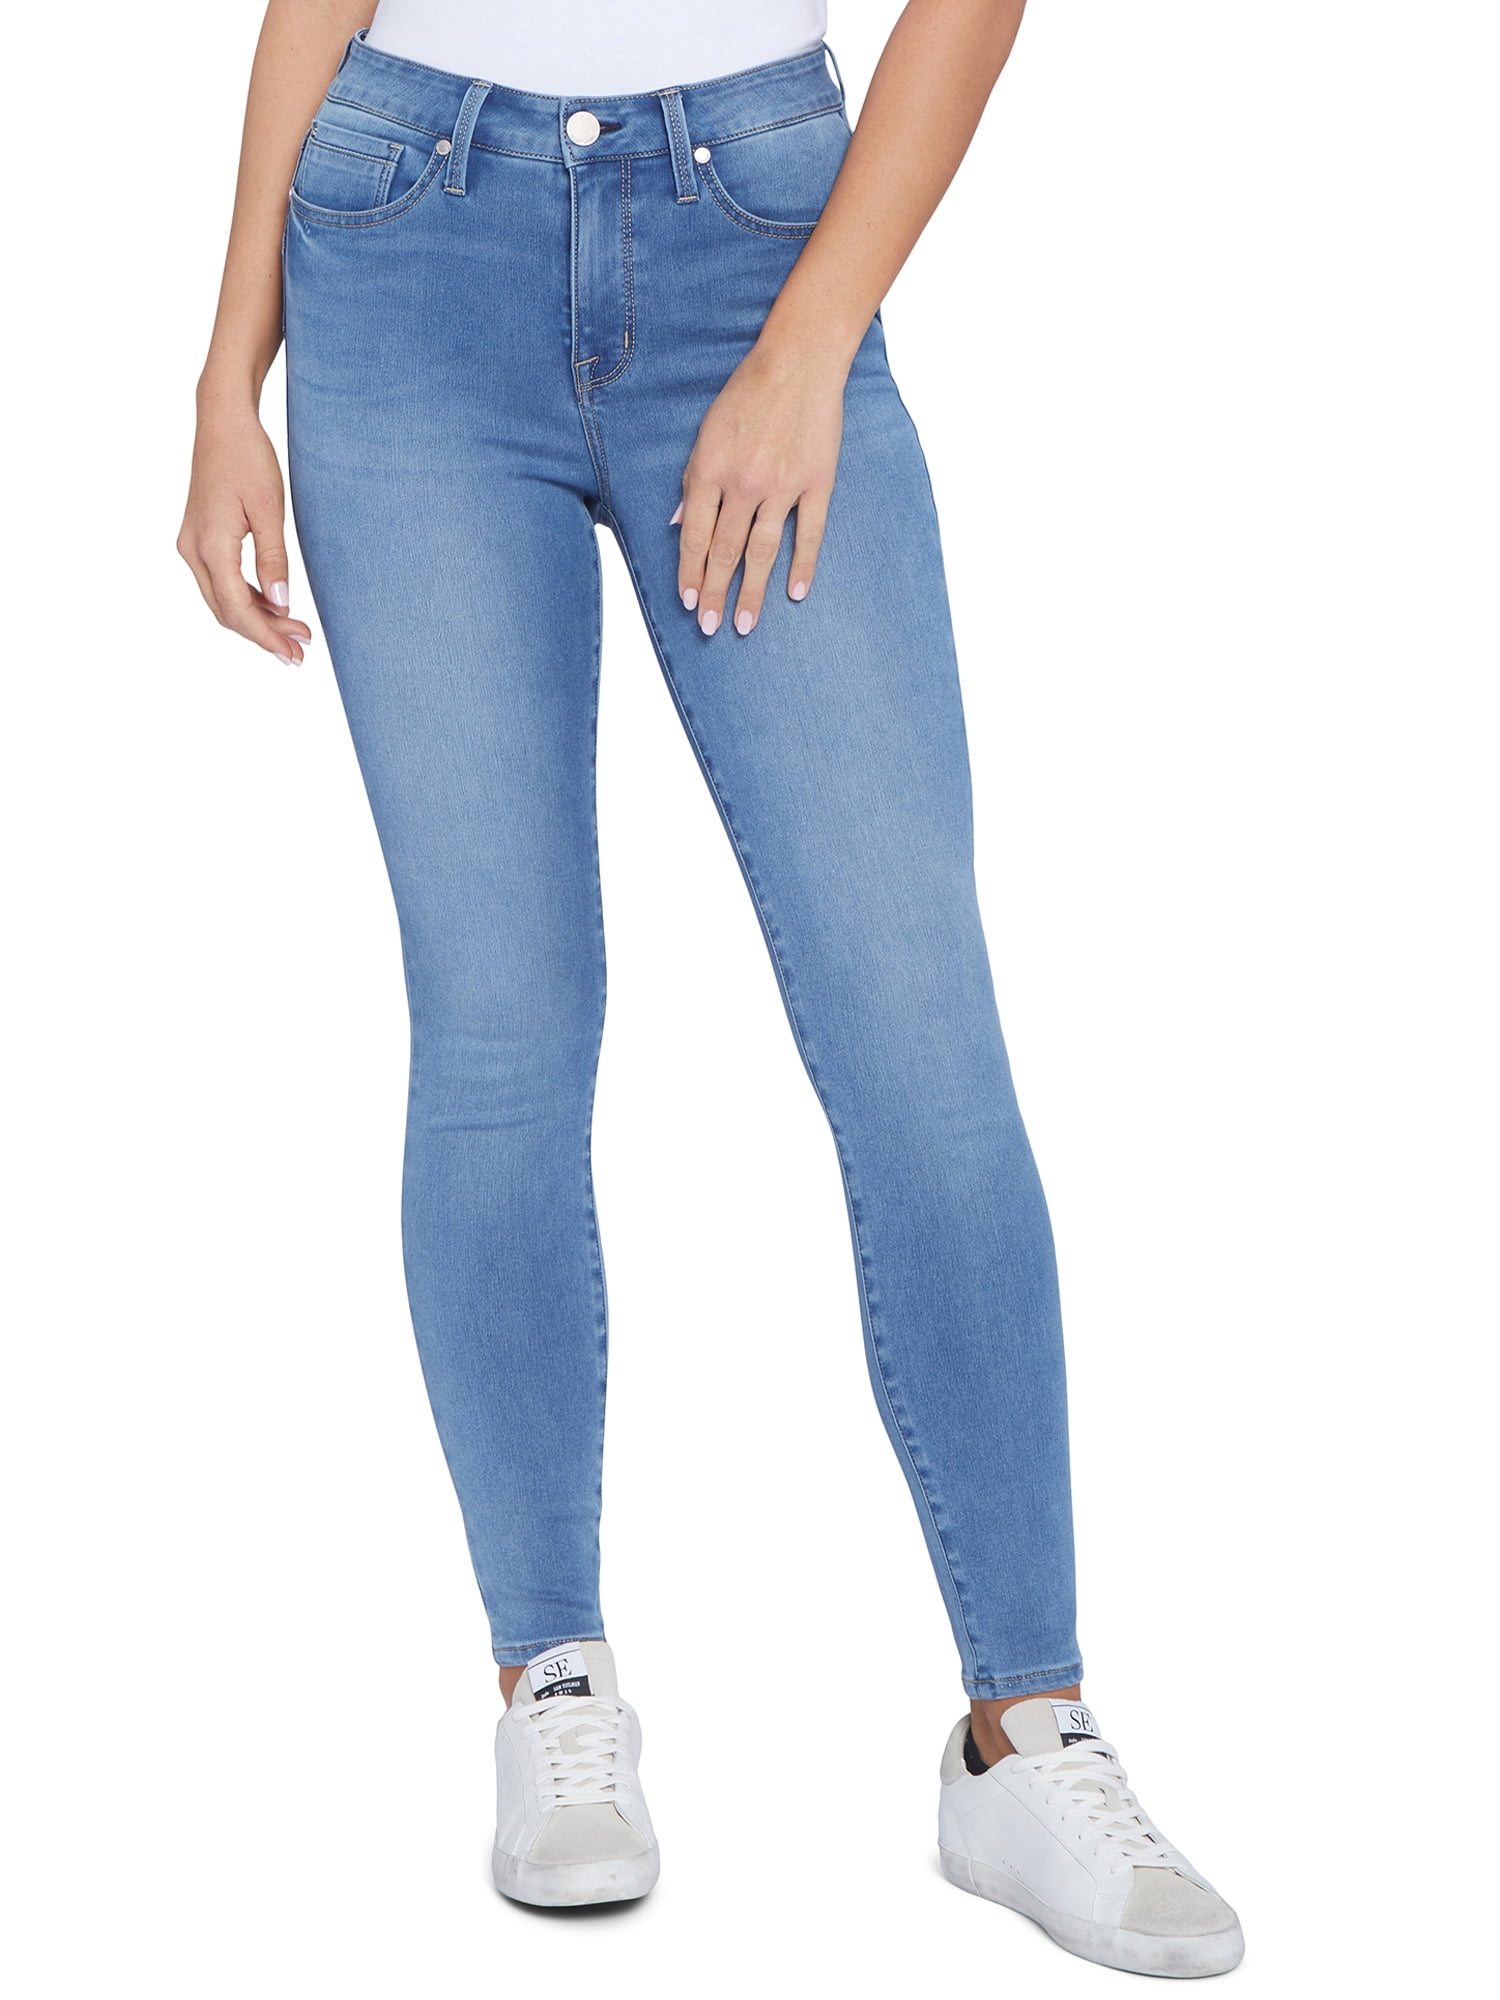 Mid Rise Booty Shaper Jean at Seven7 Jeans